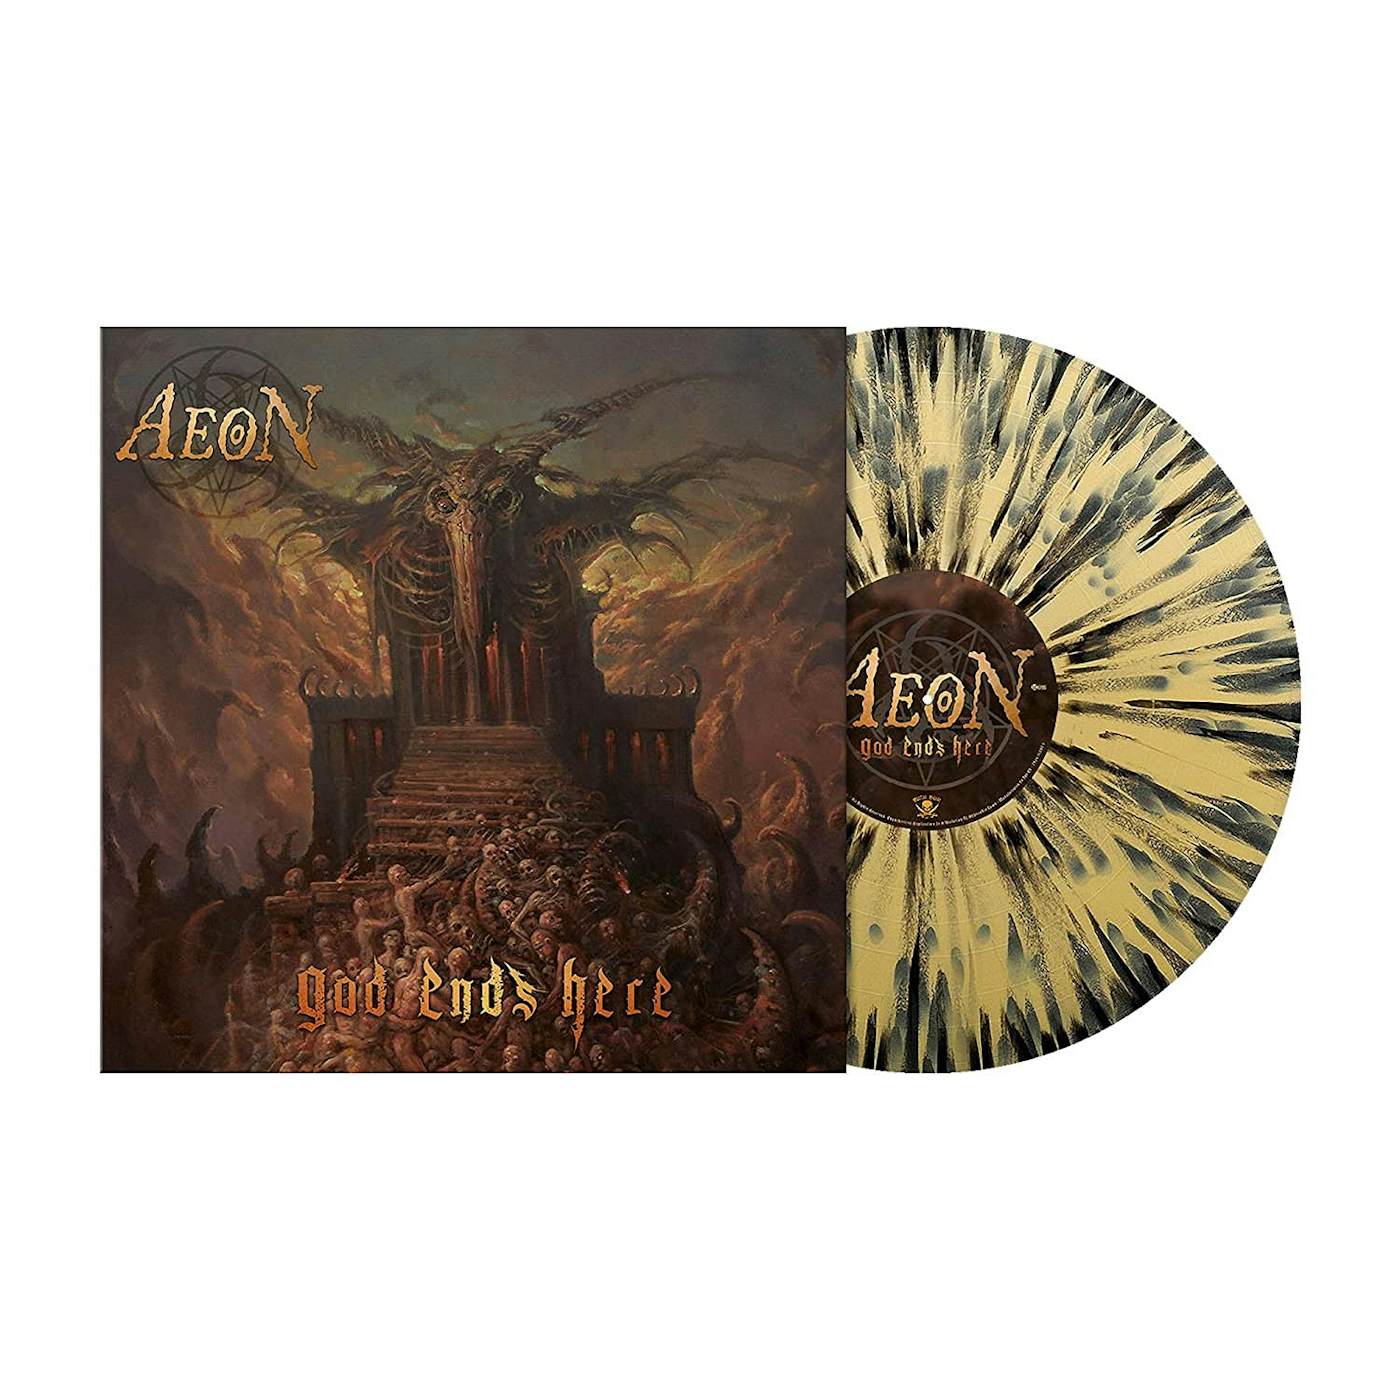 Aeon God Ends Here Vinyl Record